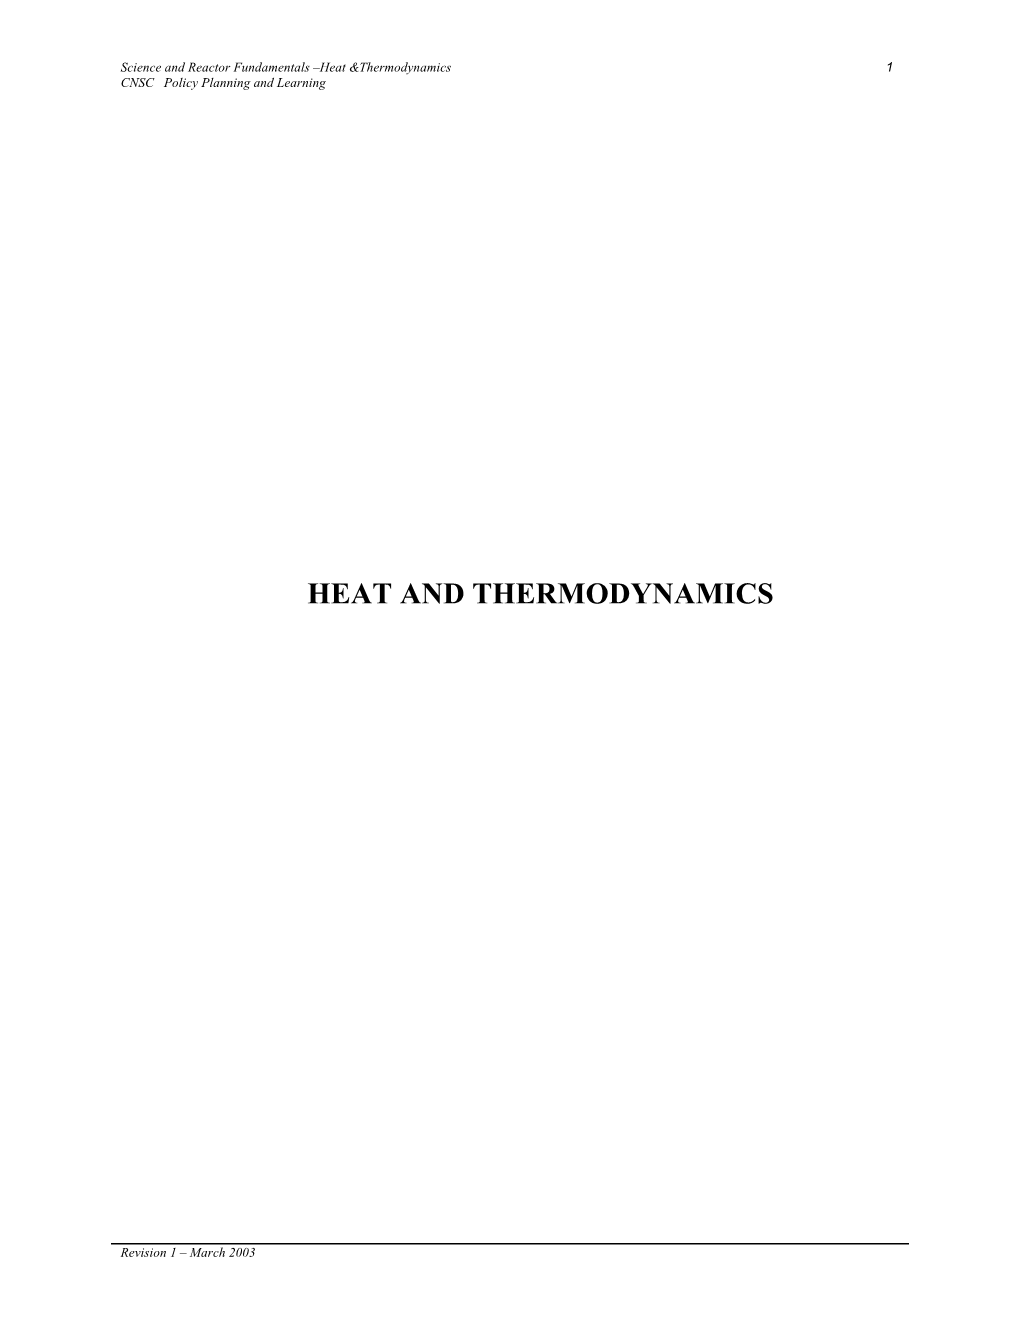 Heat and Thermodynamics Course